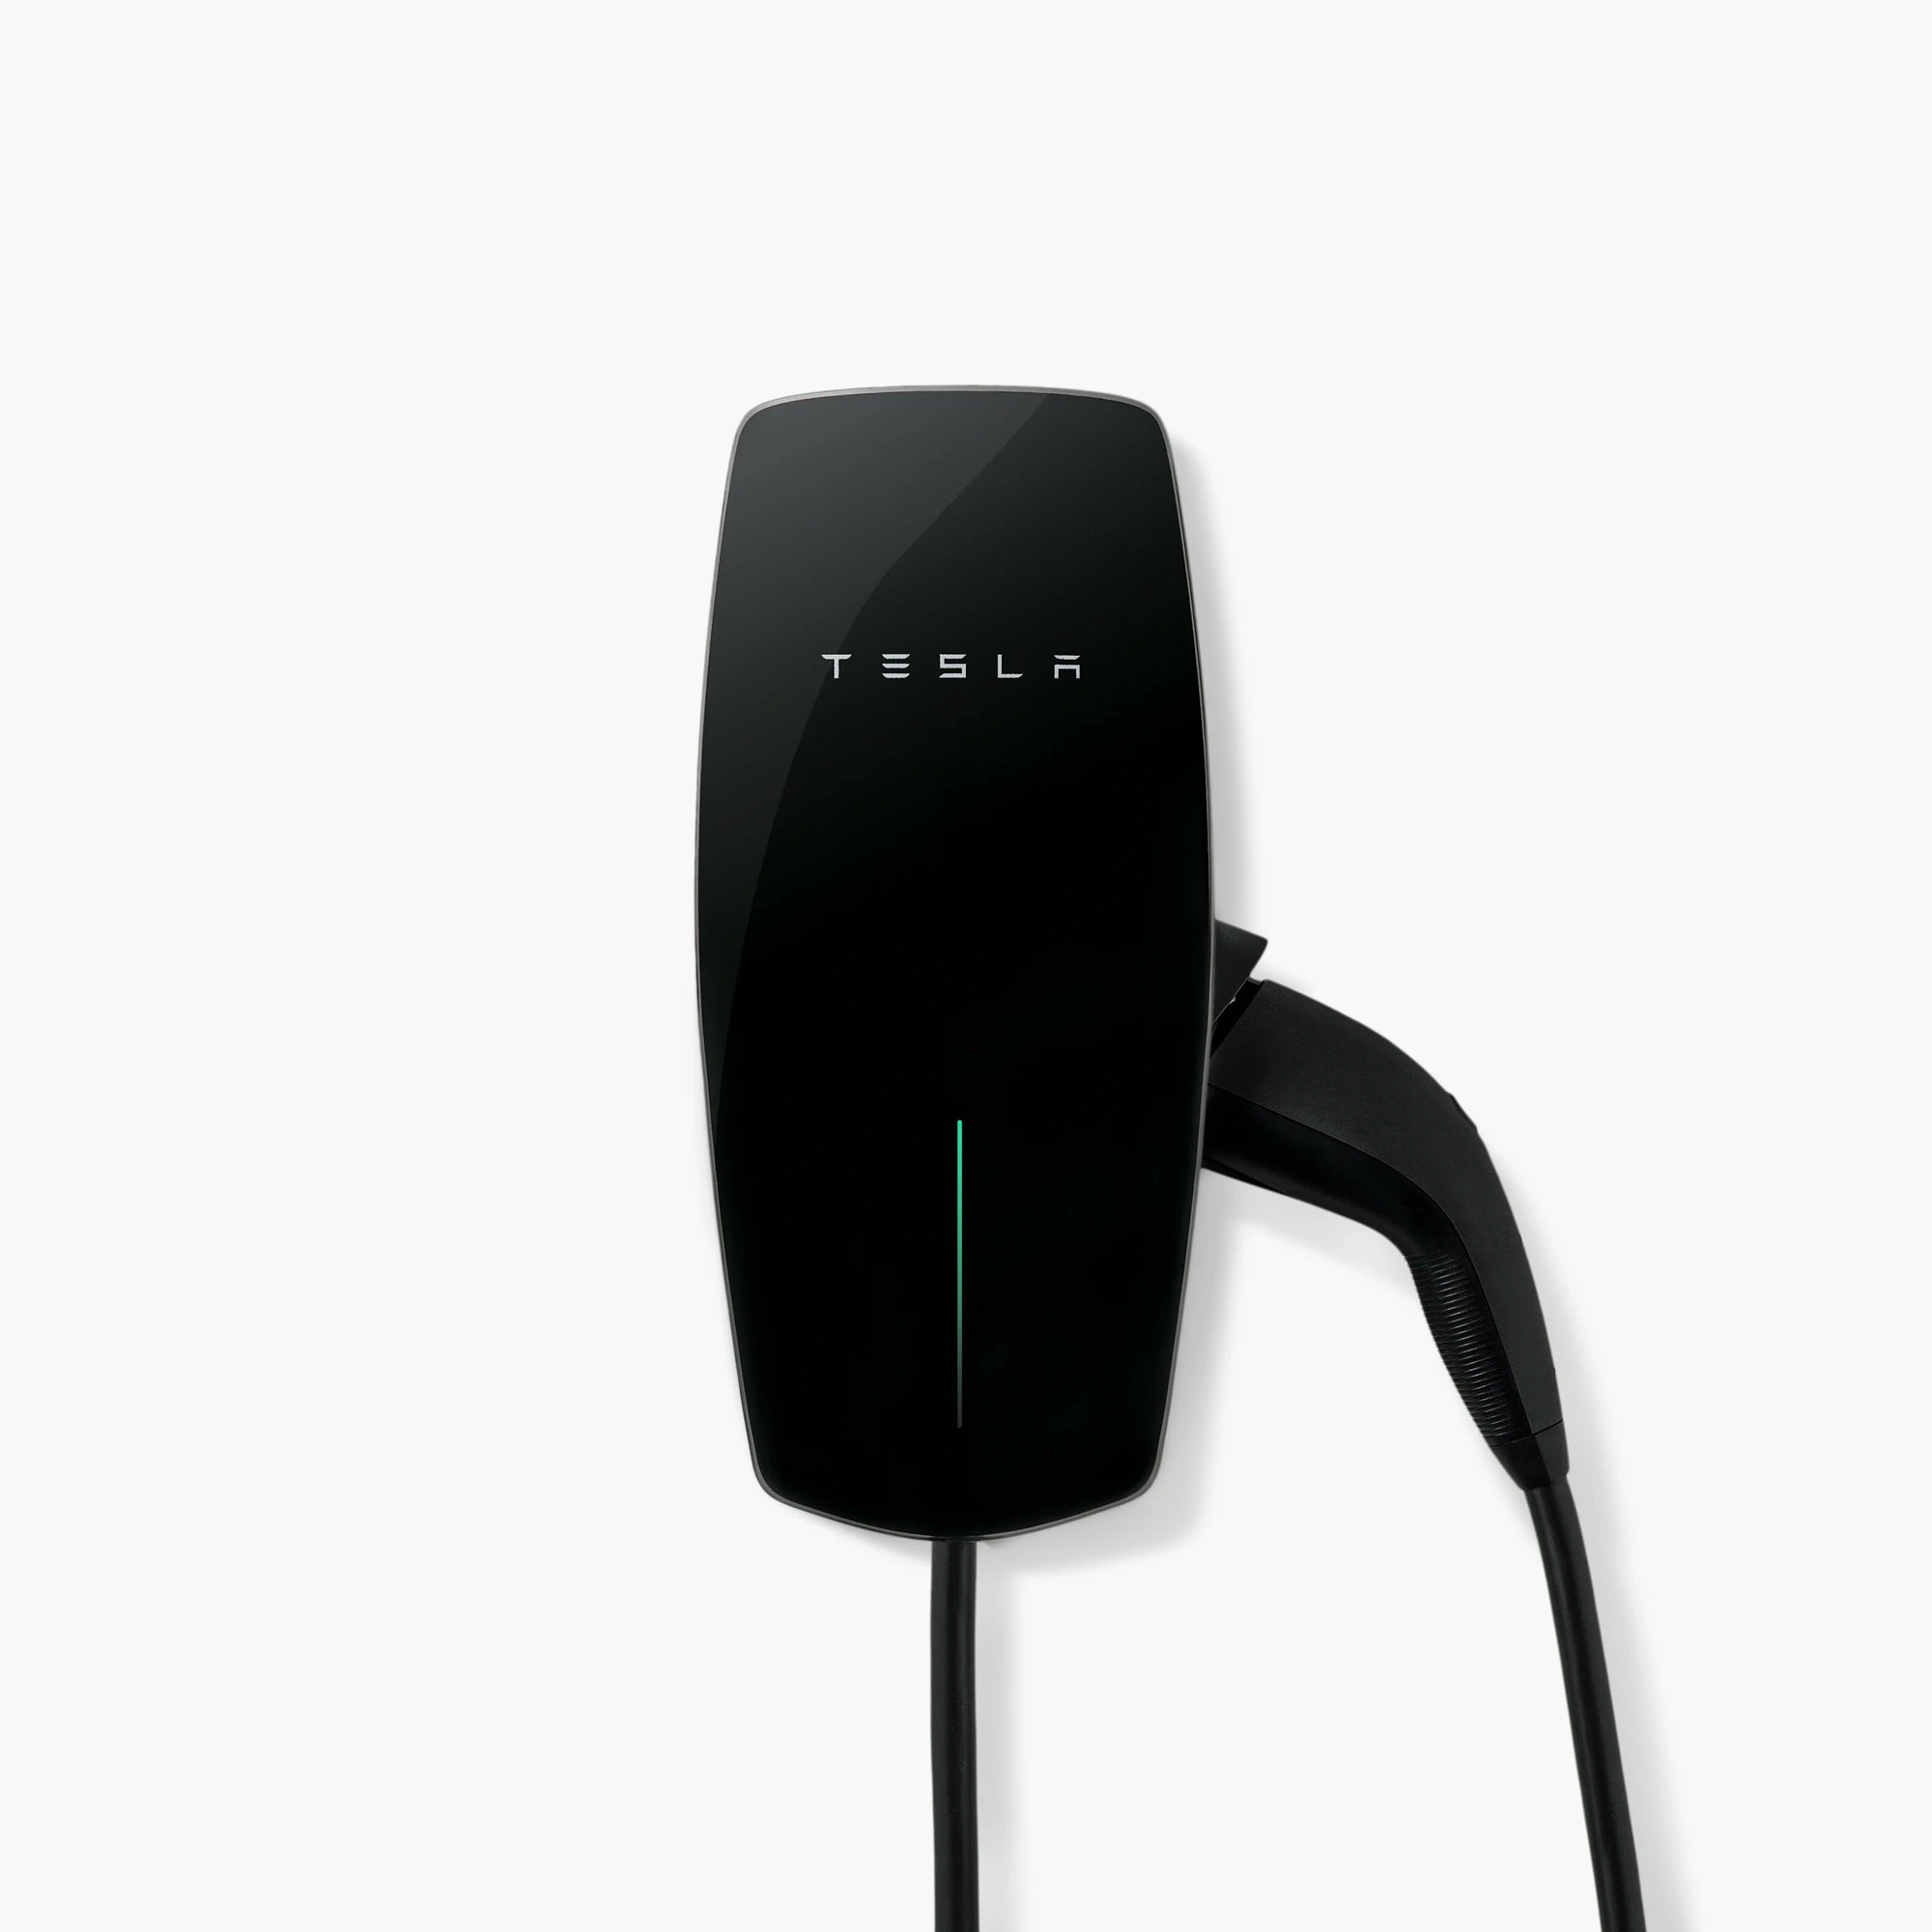 Tesla launches J1772 Wall Connector for all EVs